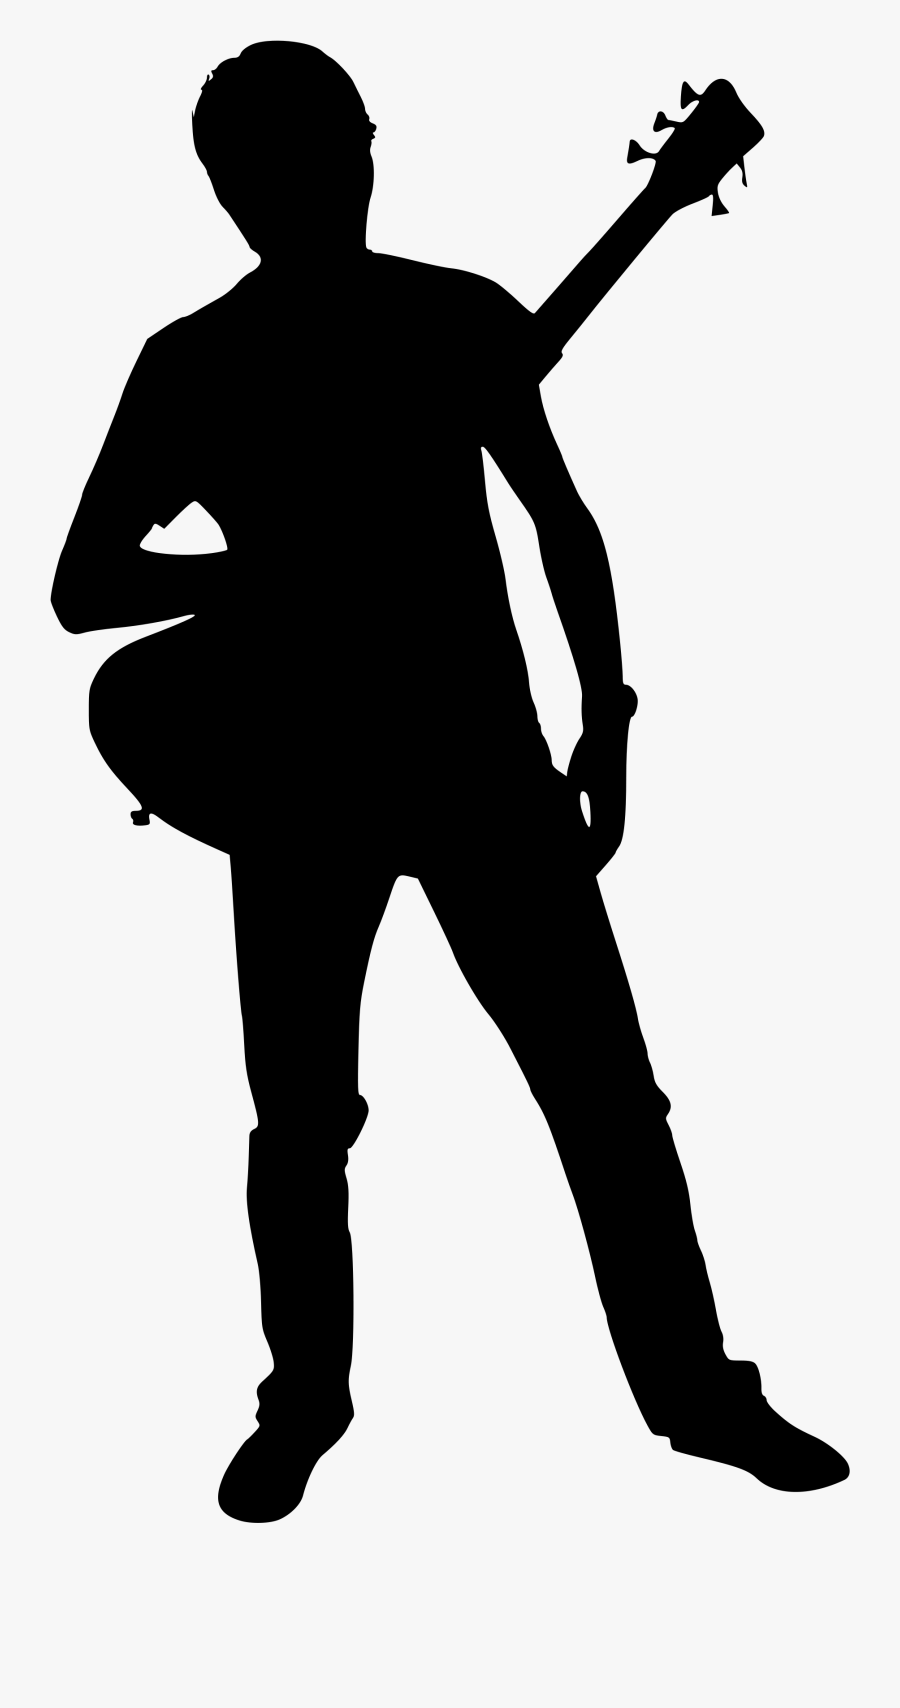 File Band Silhouette 06 Svg Wikimedia Commons - Kidz Rock, Transparent Clipart